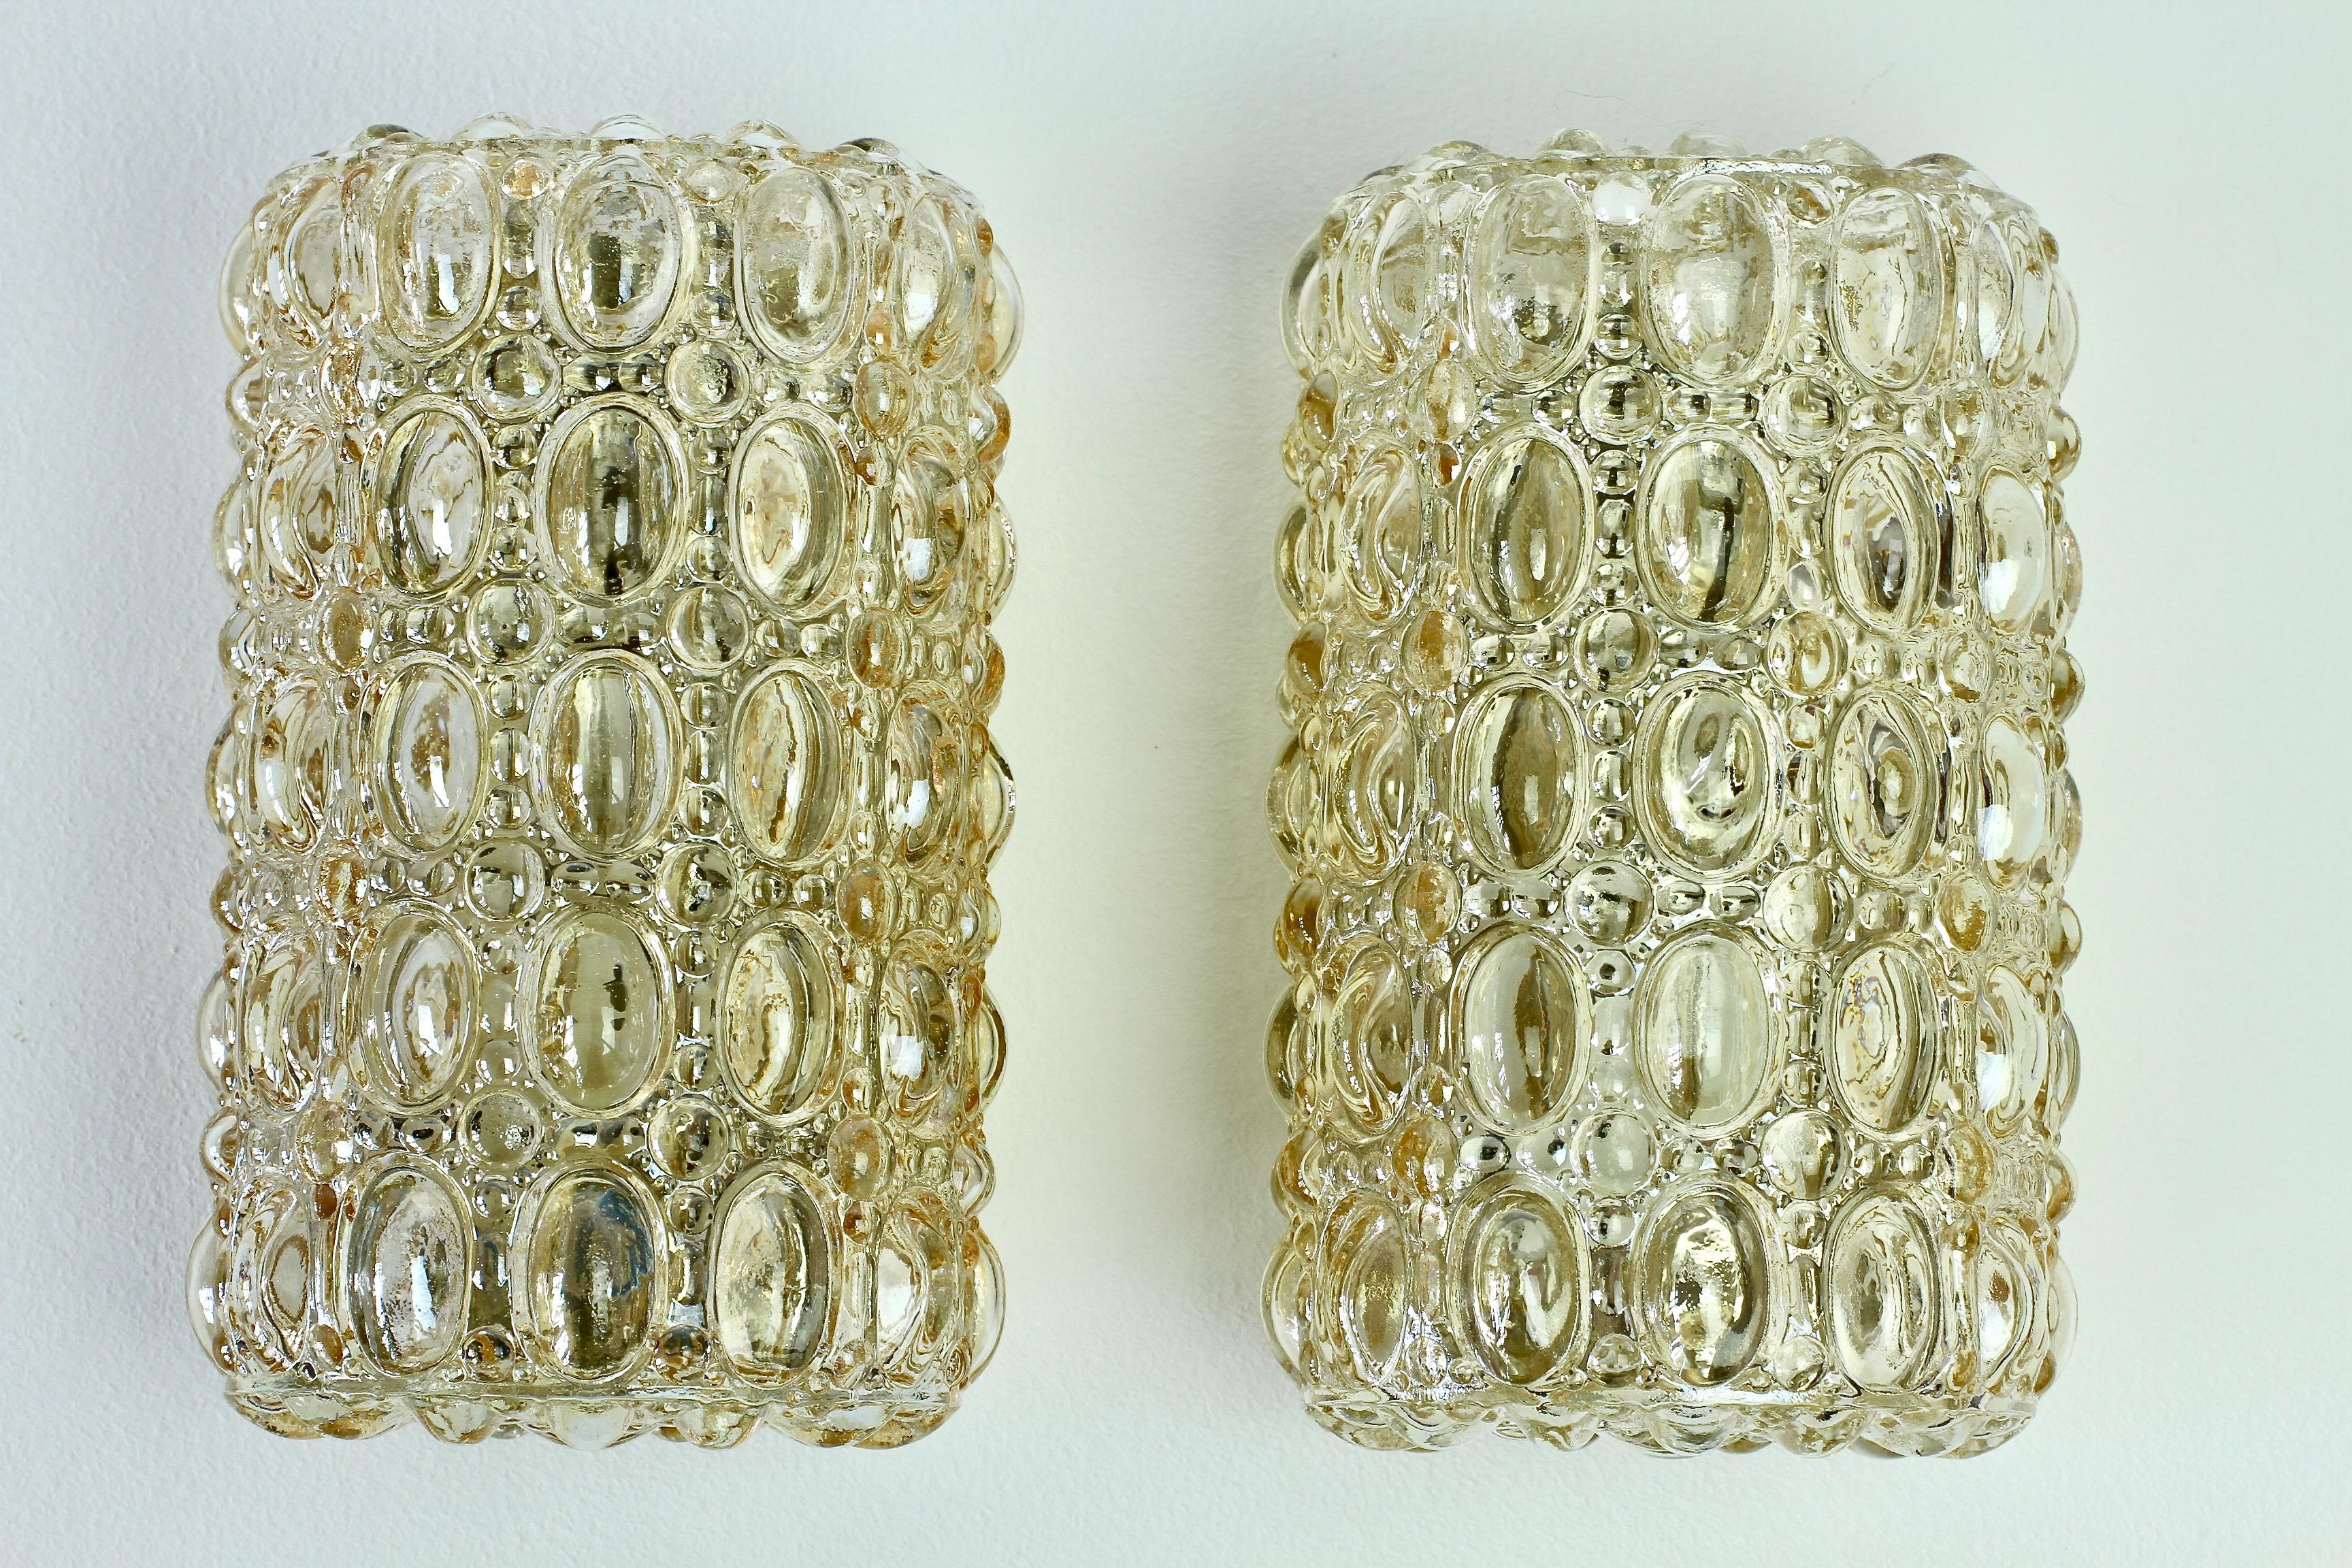 German Limburg Pair of Vintage Amber Bubble Glass Wall Lights or Sconces, circa 1970s